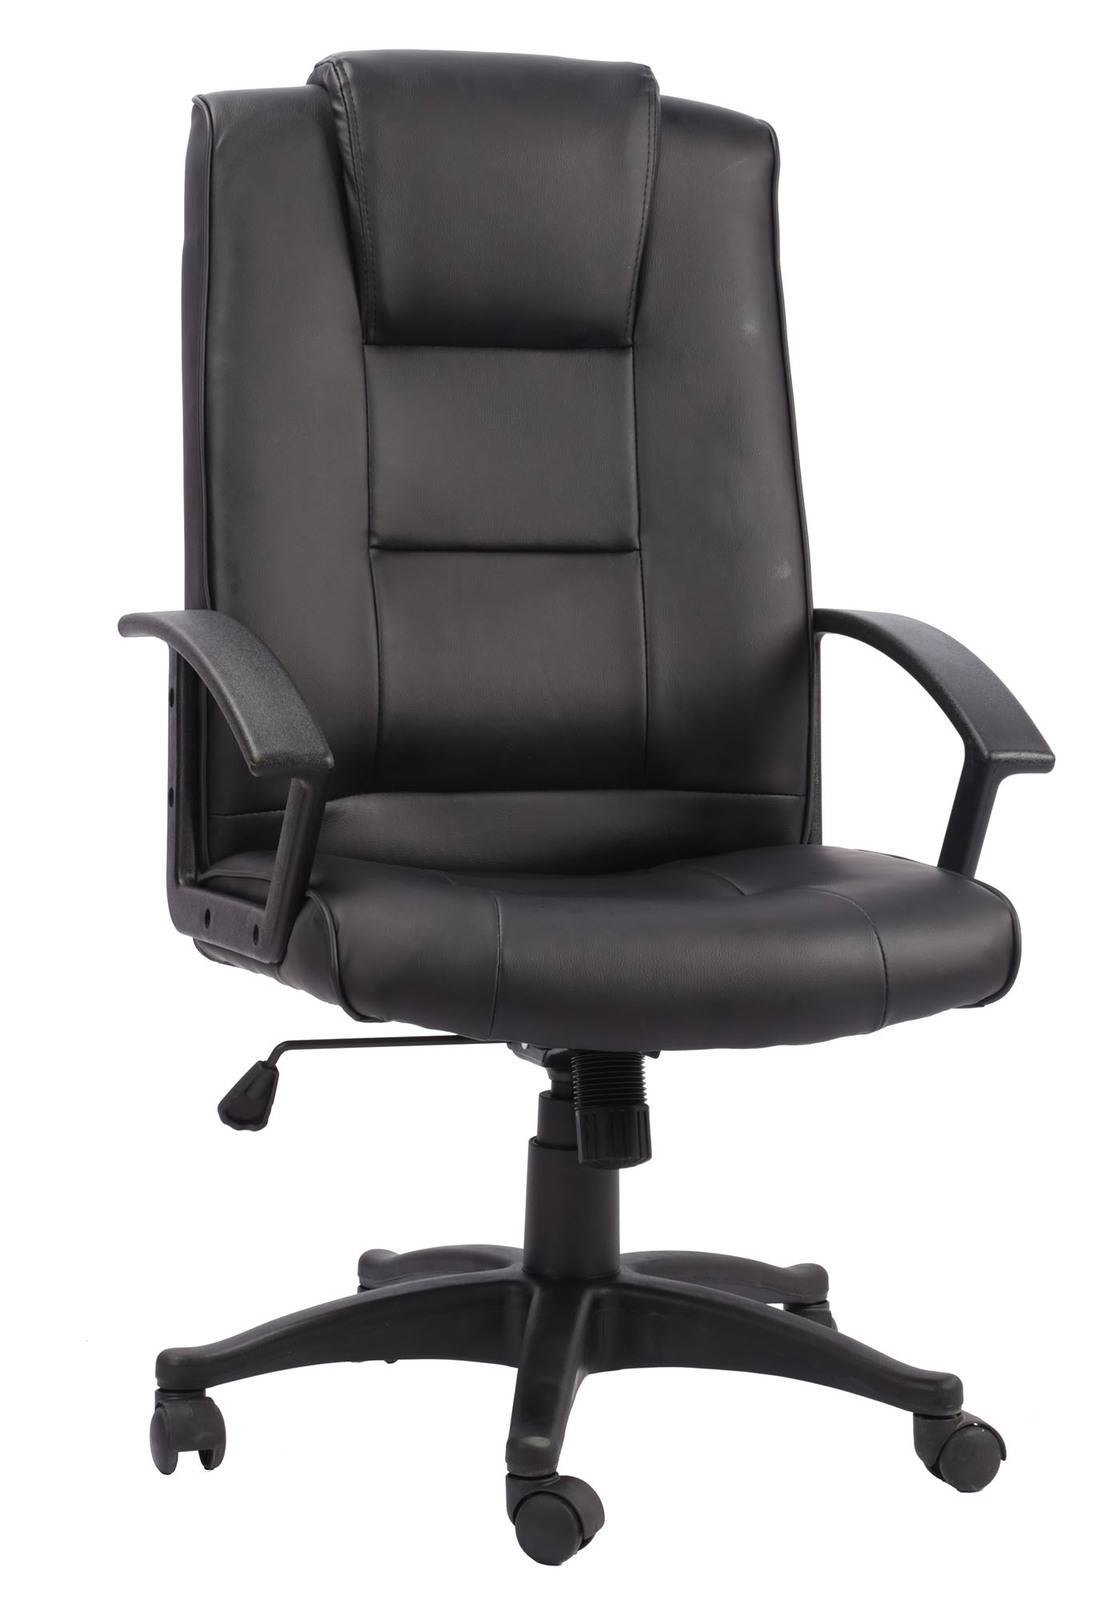 EXEC PREM PU LEATHER OFFICE COMP WORK CHAIR DELUXE BLACK17